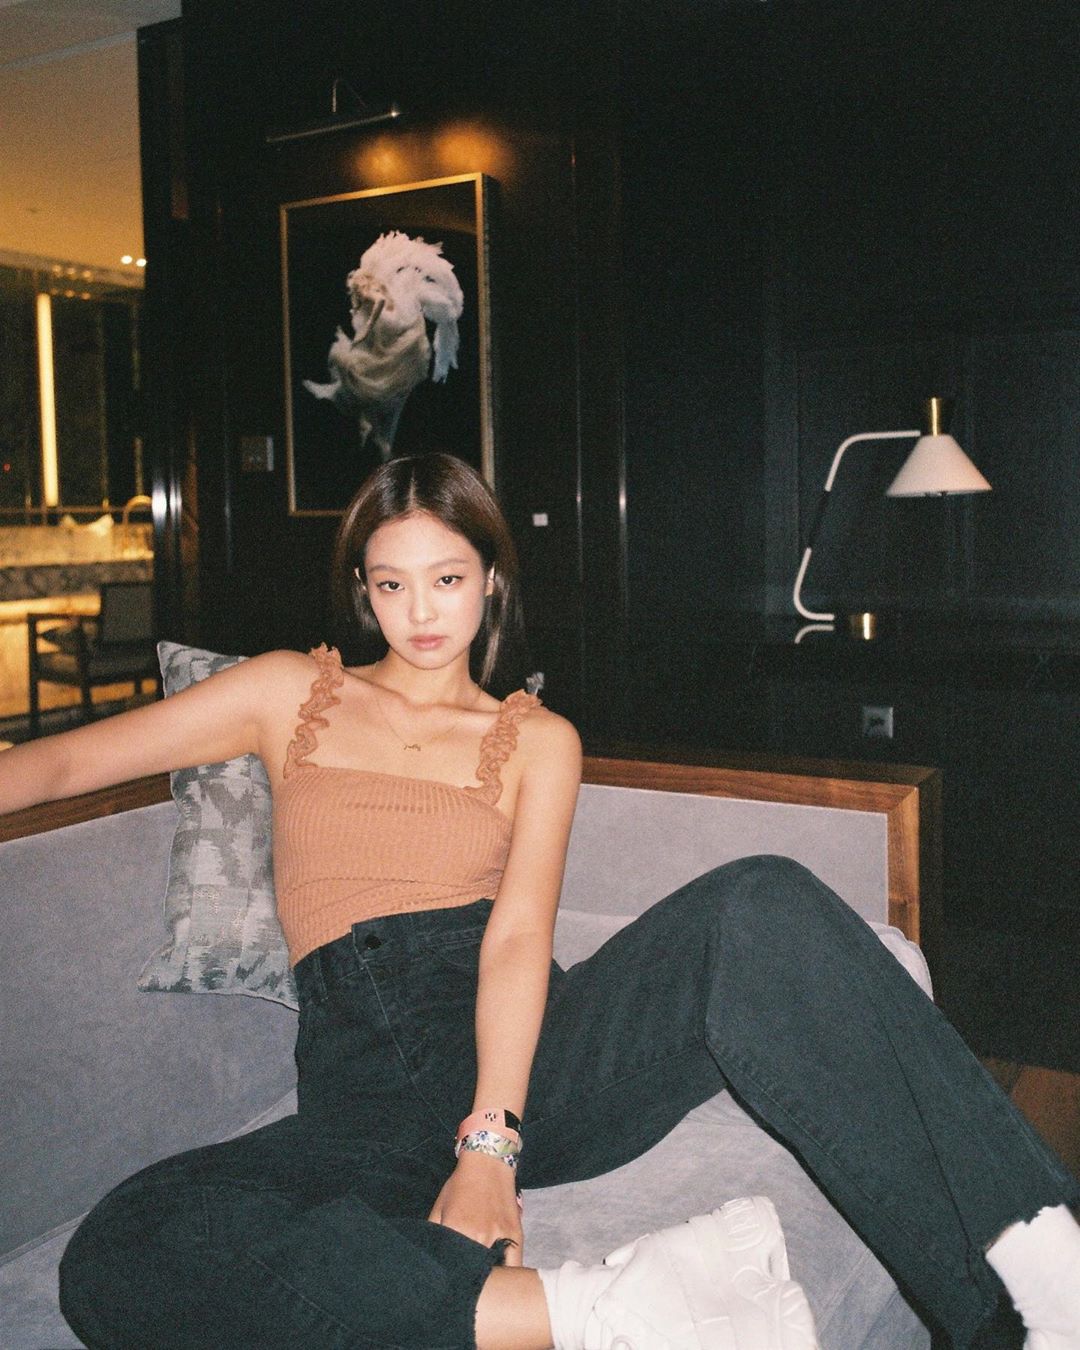 The Most Fashionable Moments of BLACKPINK - Jennie